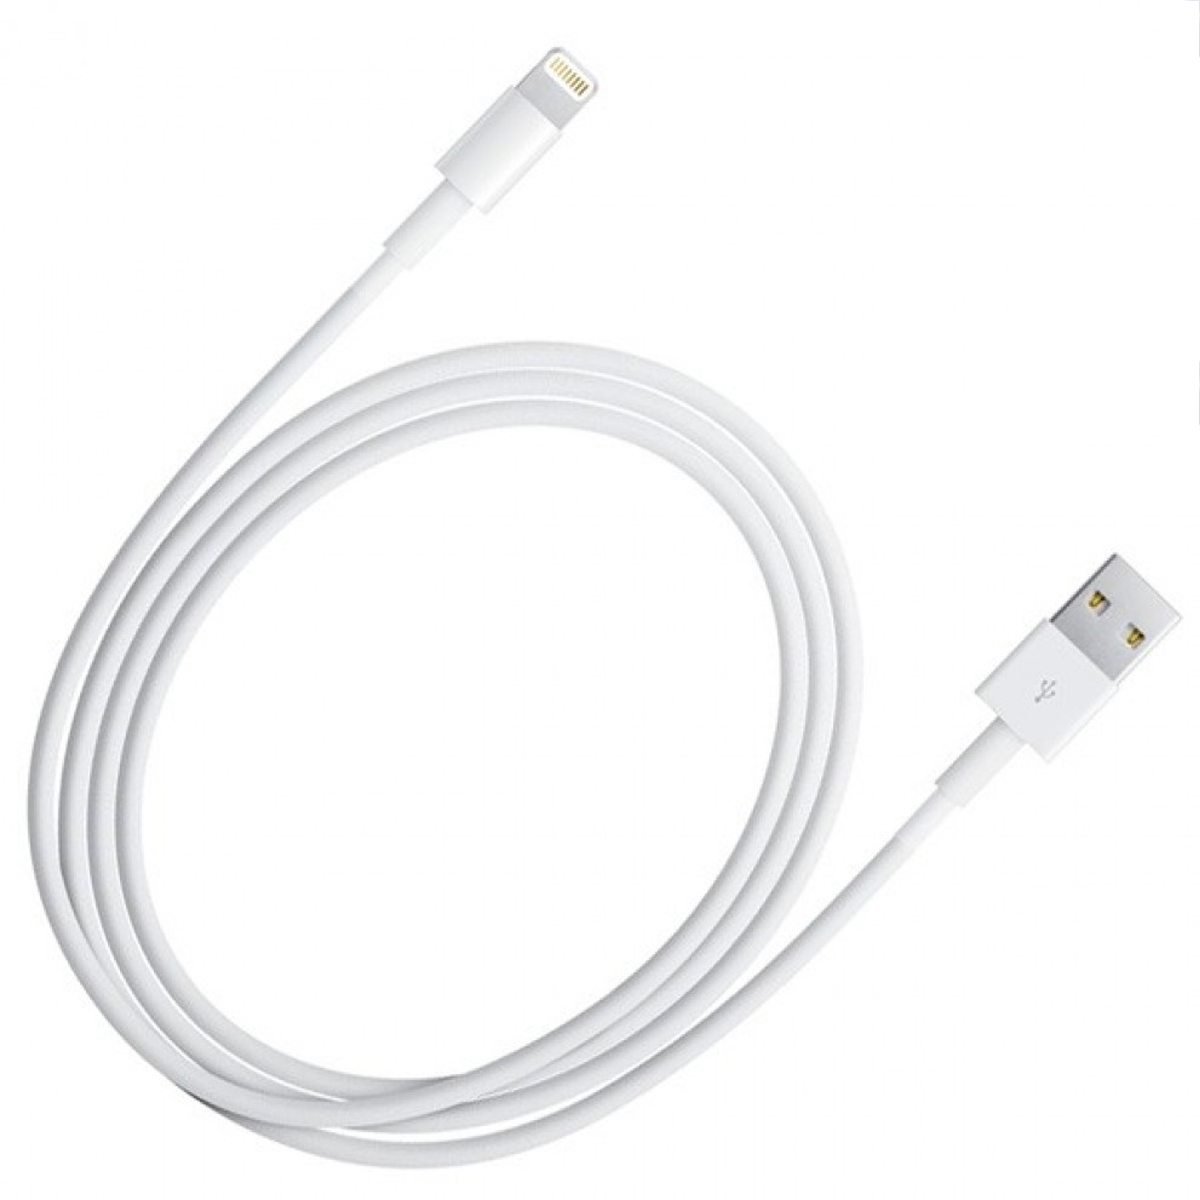 8 Pin Charging Lightning Cable Data USB Sync Charger Cord iPhone 6 Plus ...